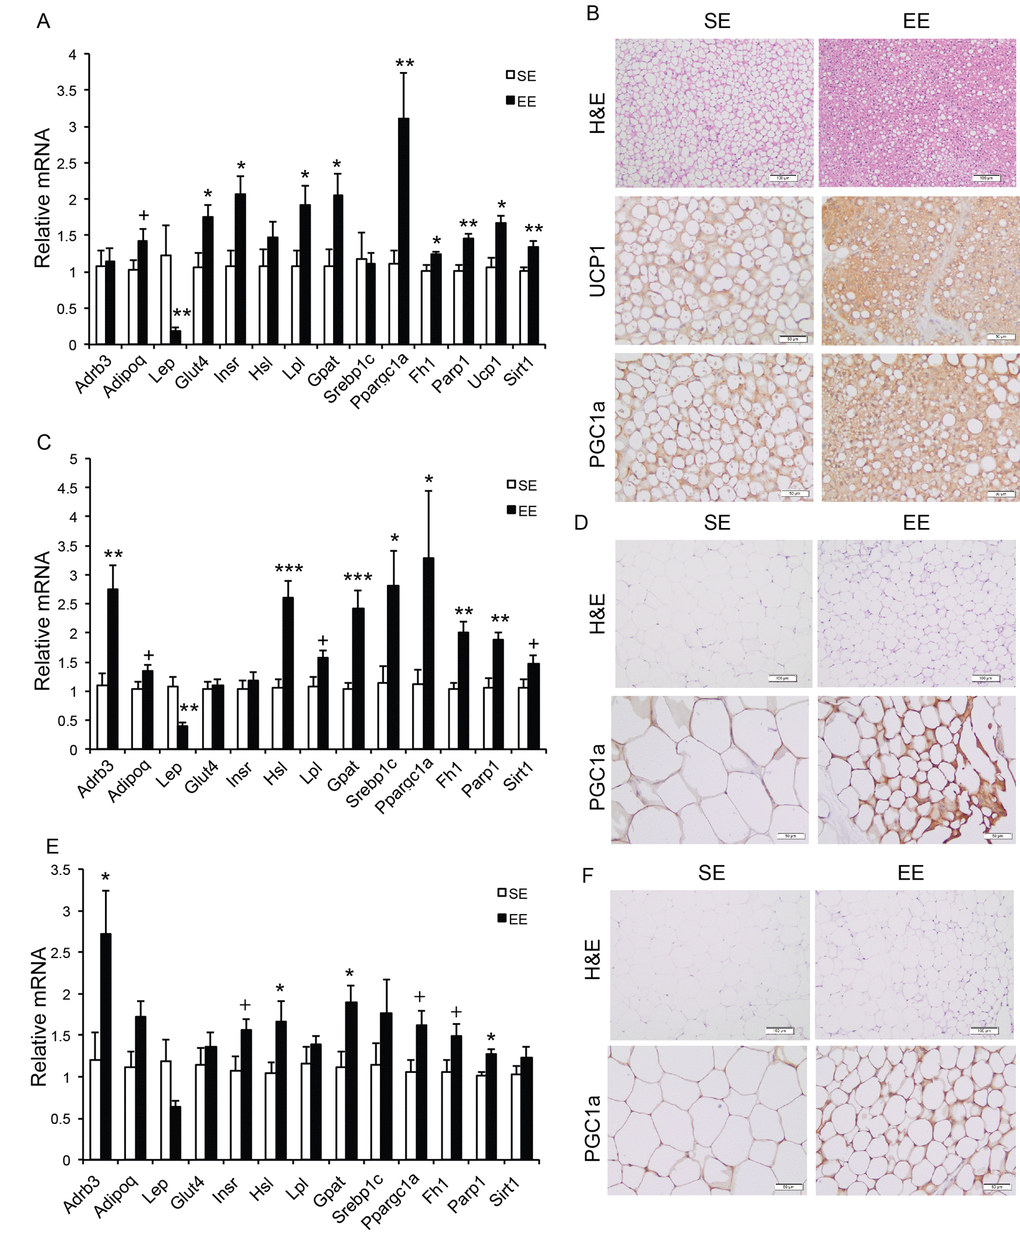 Analyses of adipose tissues at the age of 22 months after 12-month EE. Gene expression profiles of (A) BAT (n=6 per group), (C) rWAT (n=6 per group), and (E) gWAT (n=6 per group). (B) Immunohistochemistry of BAT. (D) Immunohistochemistry of rWAT. (F) Immunohistochemistry of gWAT. Scale bar, 100 µm in H&E, 50 µm in UCP1 and PGC-1α staining. * PPPP=0.06. Values are means ± SEM.